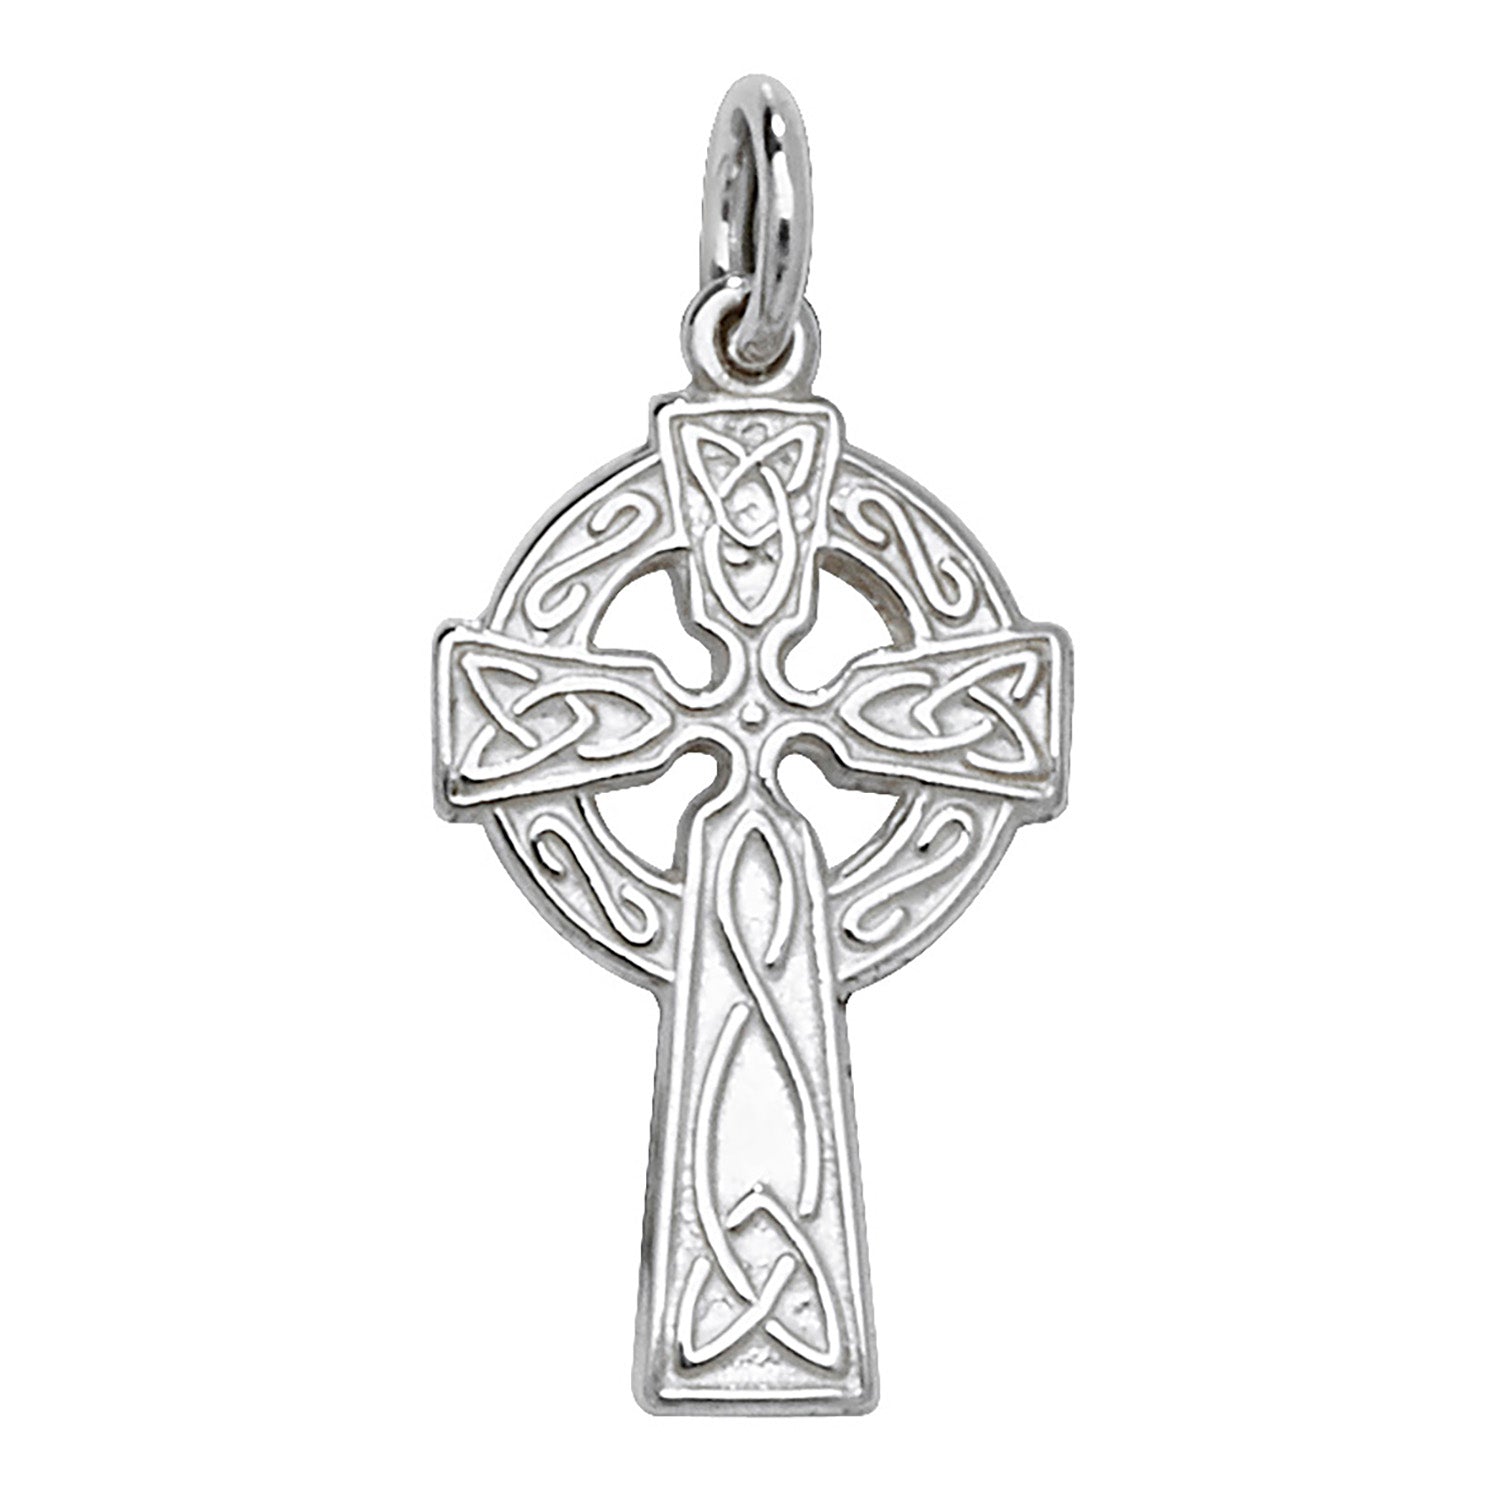 Silver Celtic Cross Necklace - Very Small - John Ross Jewellers